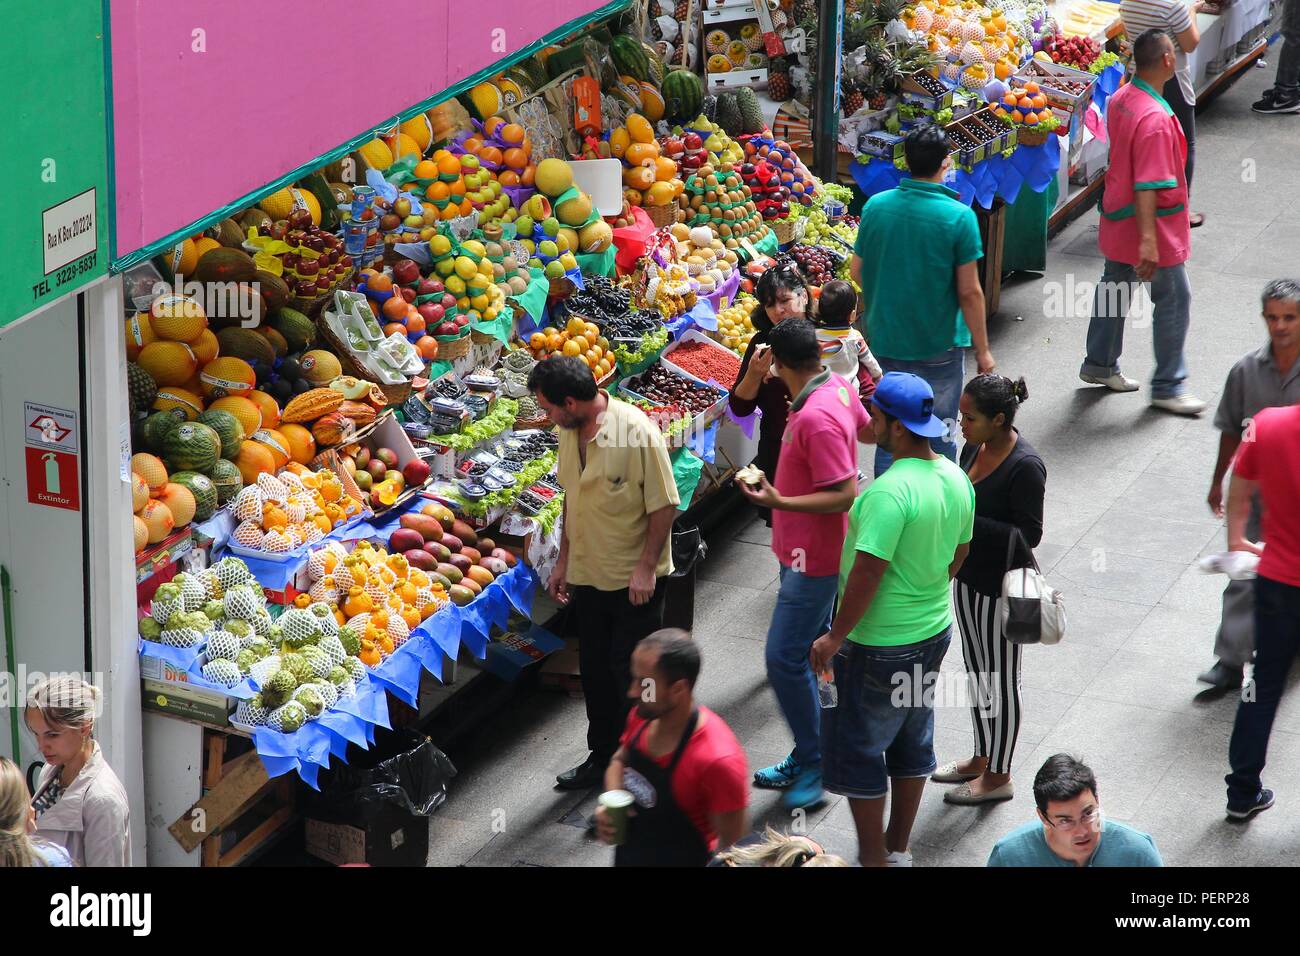 SAO PAULO, BRAZIL - OCTOBER 6, 2014: People visit Municipal Market in Sao Paulo. The market was opened in 1933 and currently sells about 350 tons of f Stock Photo